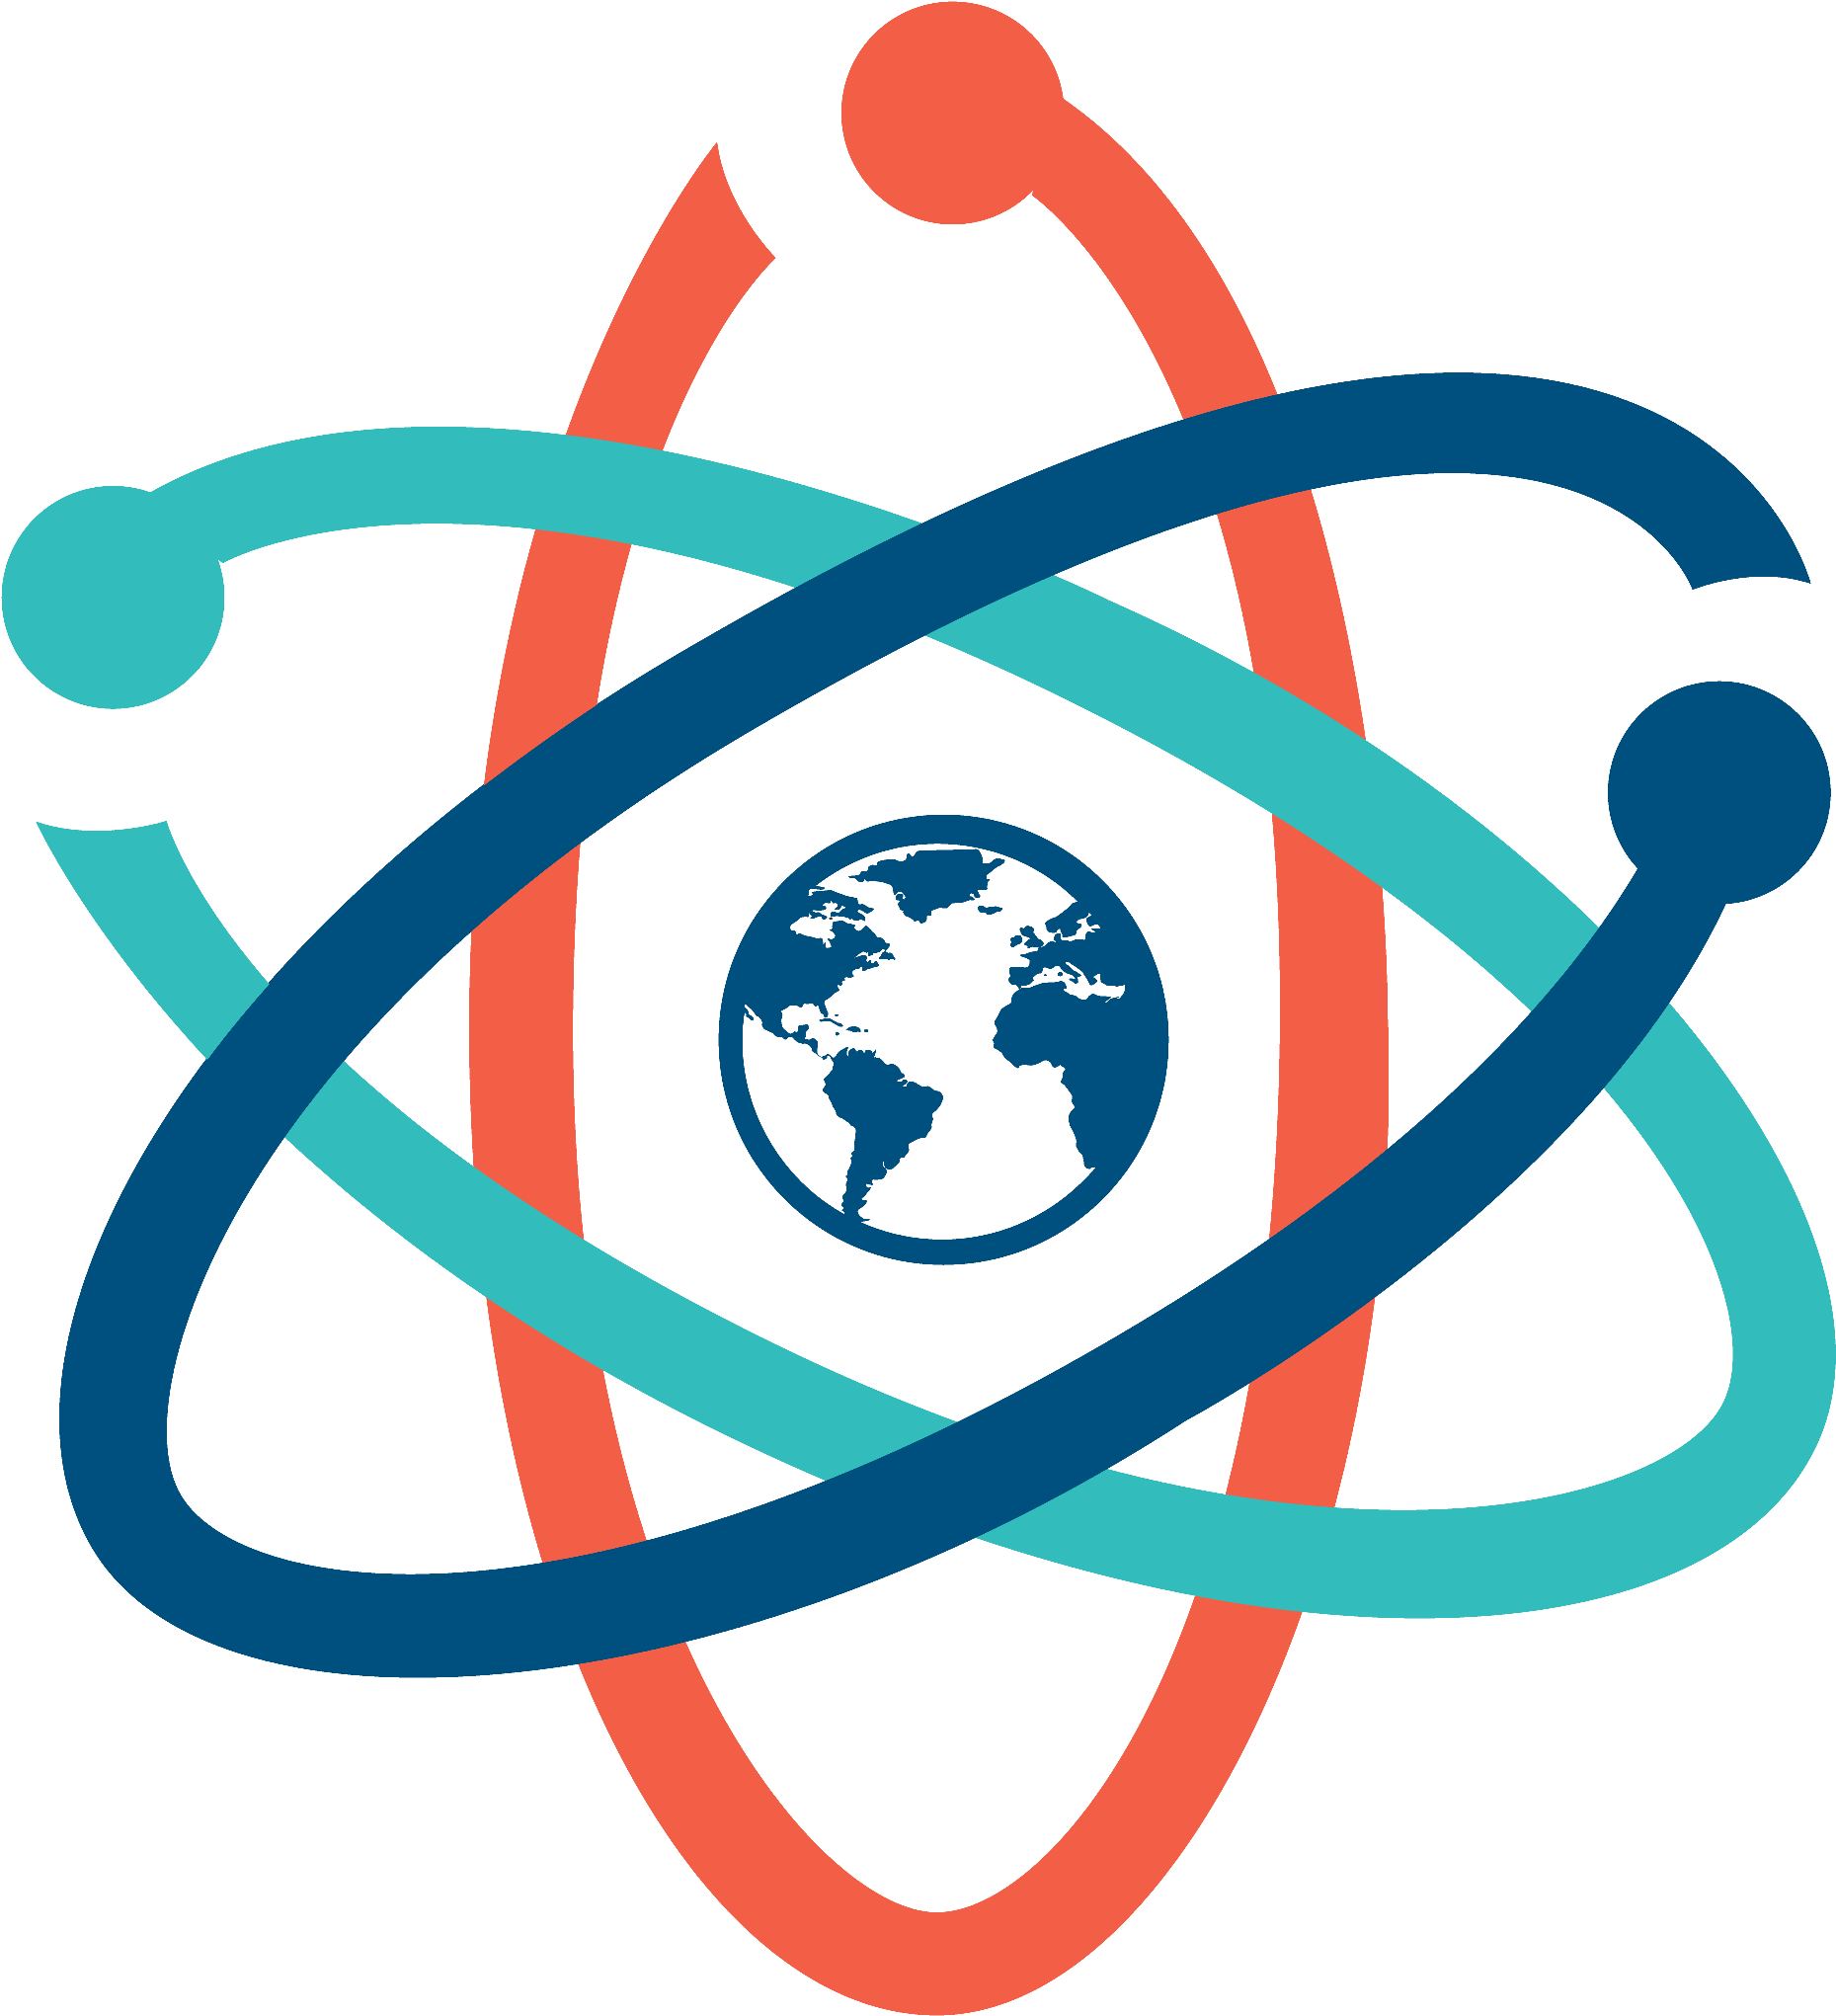 Now The Question Is Really About Case Third, Where - March For Science Logo (2000x2170)